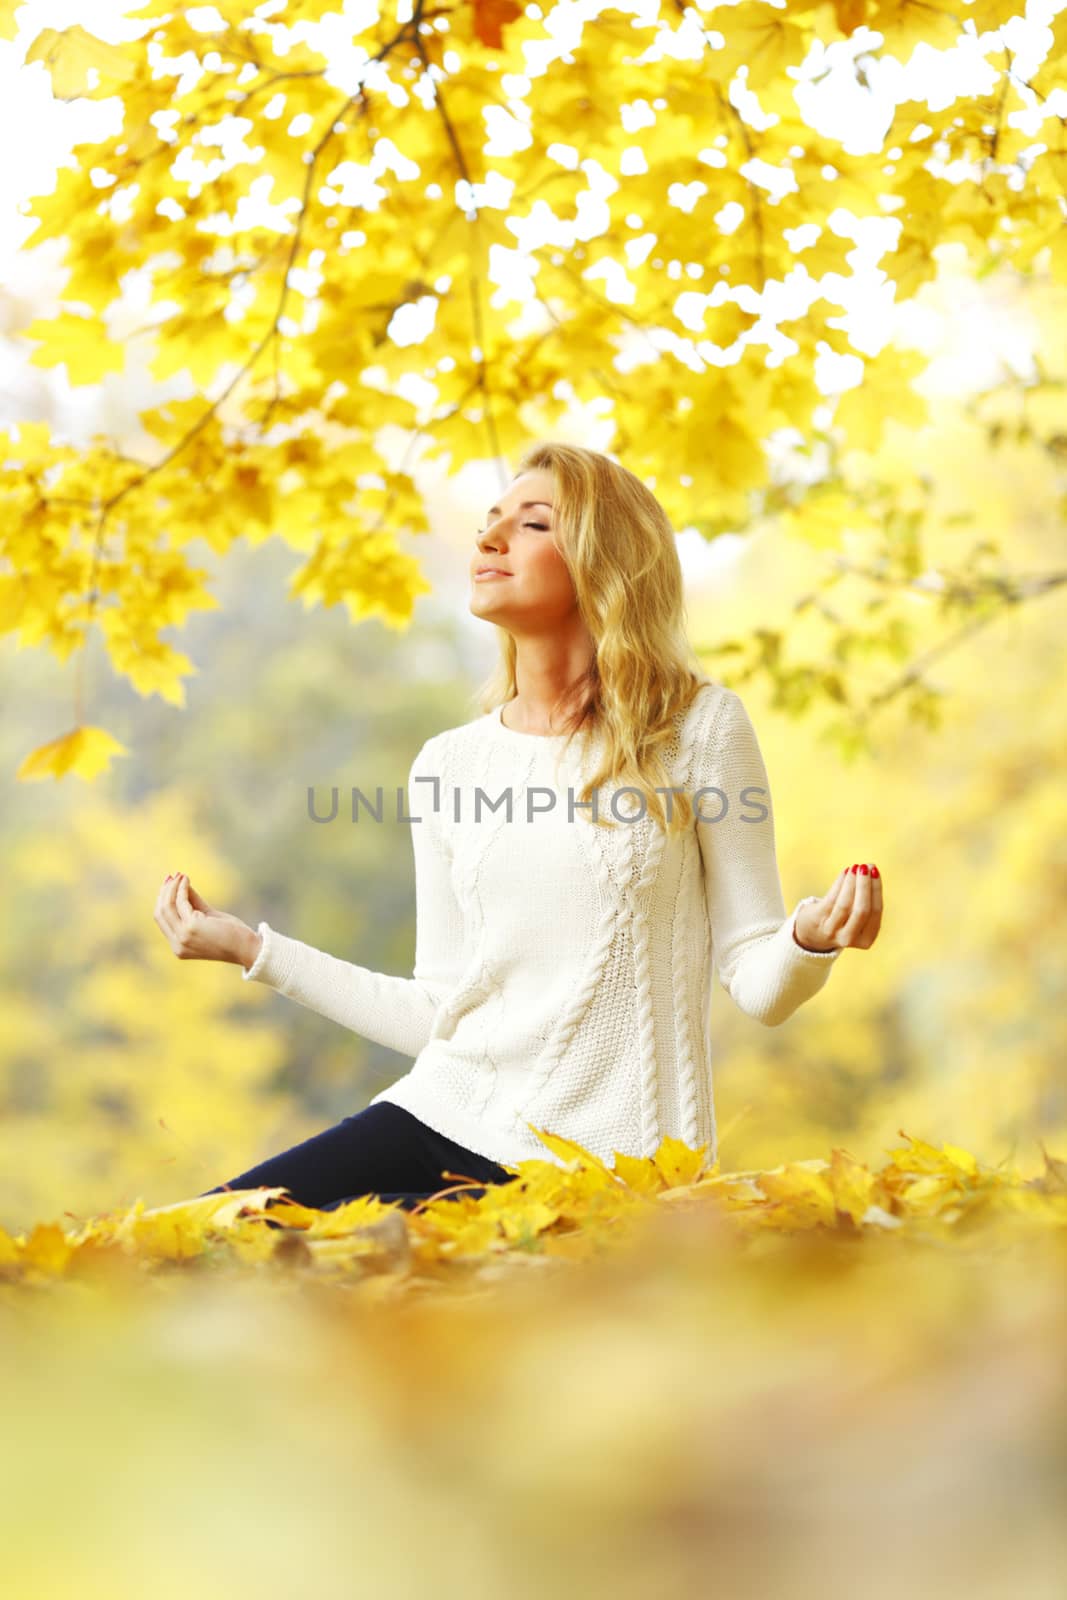 Woman meditating in autumn park by Yellowj